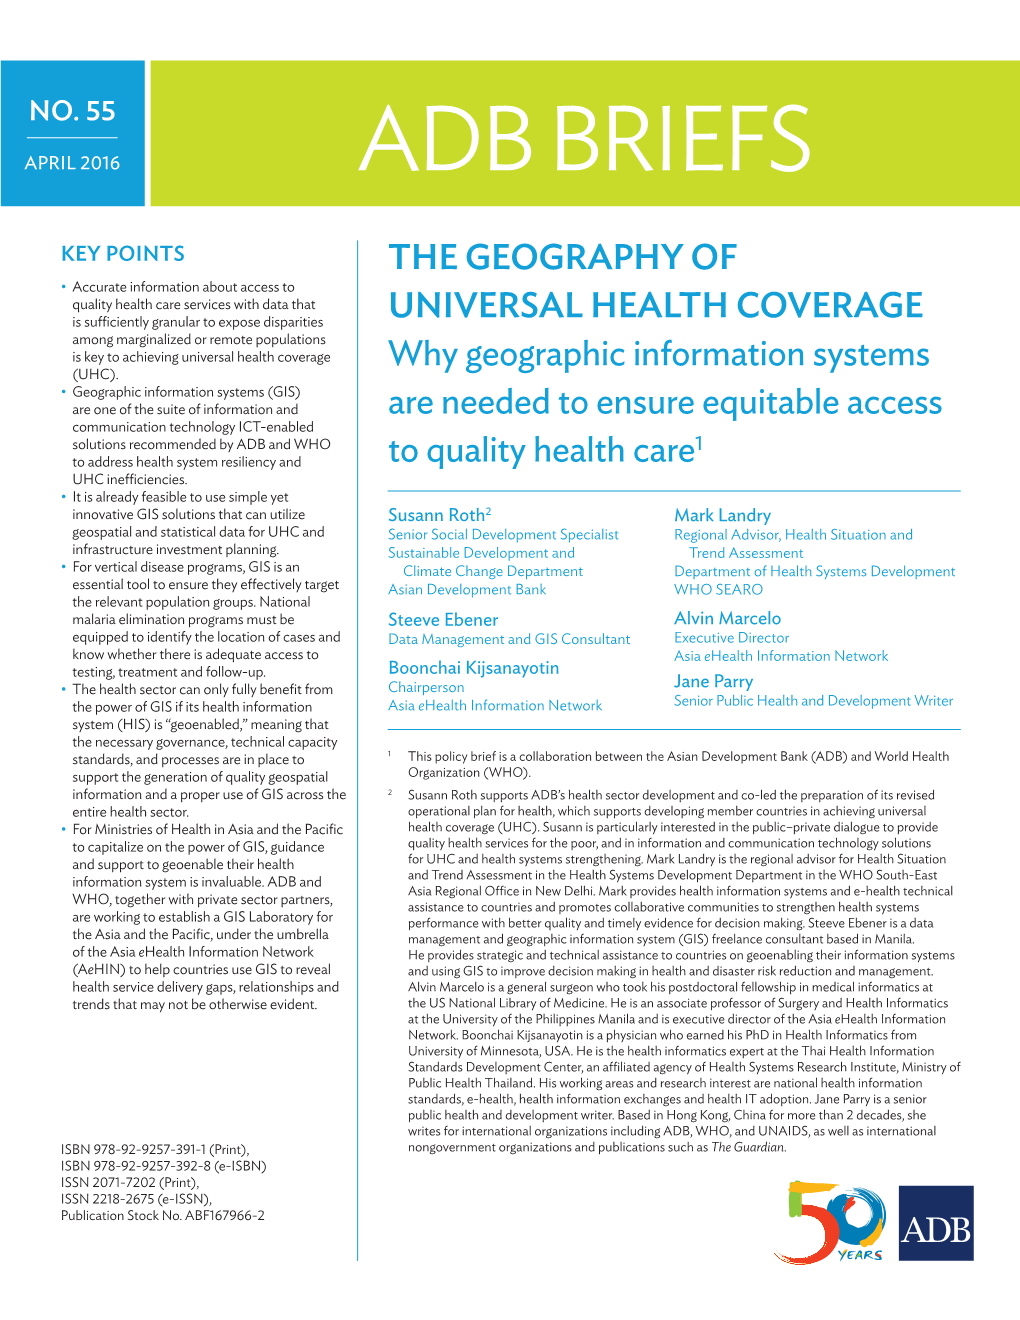 The Geography of Universal Health Coverage NO